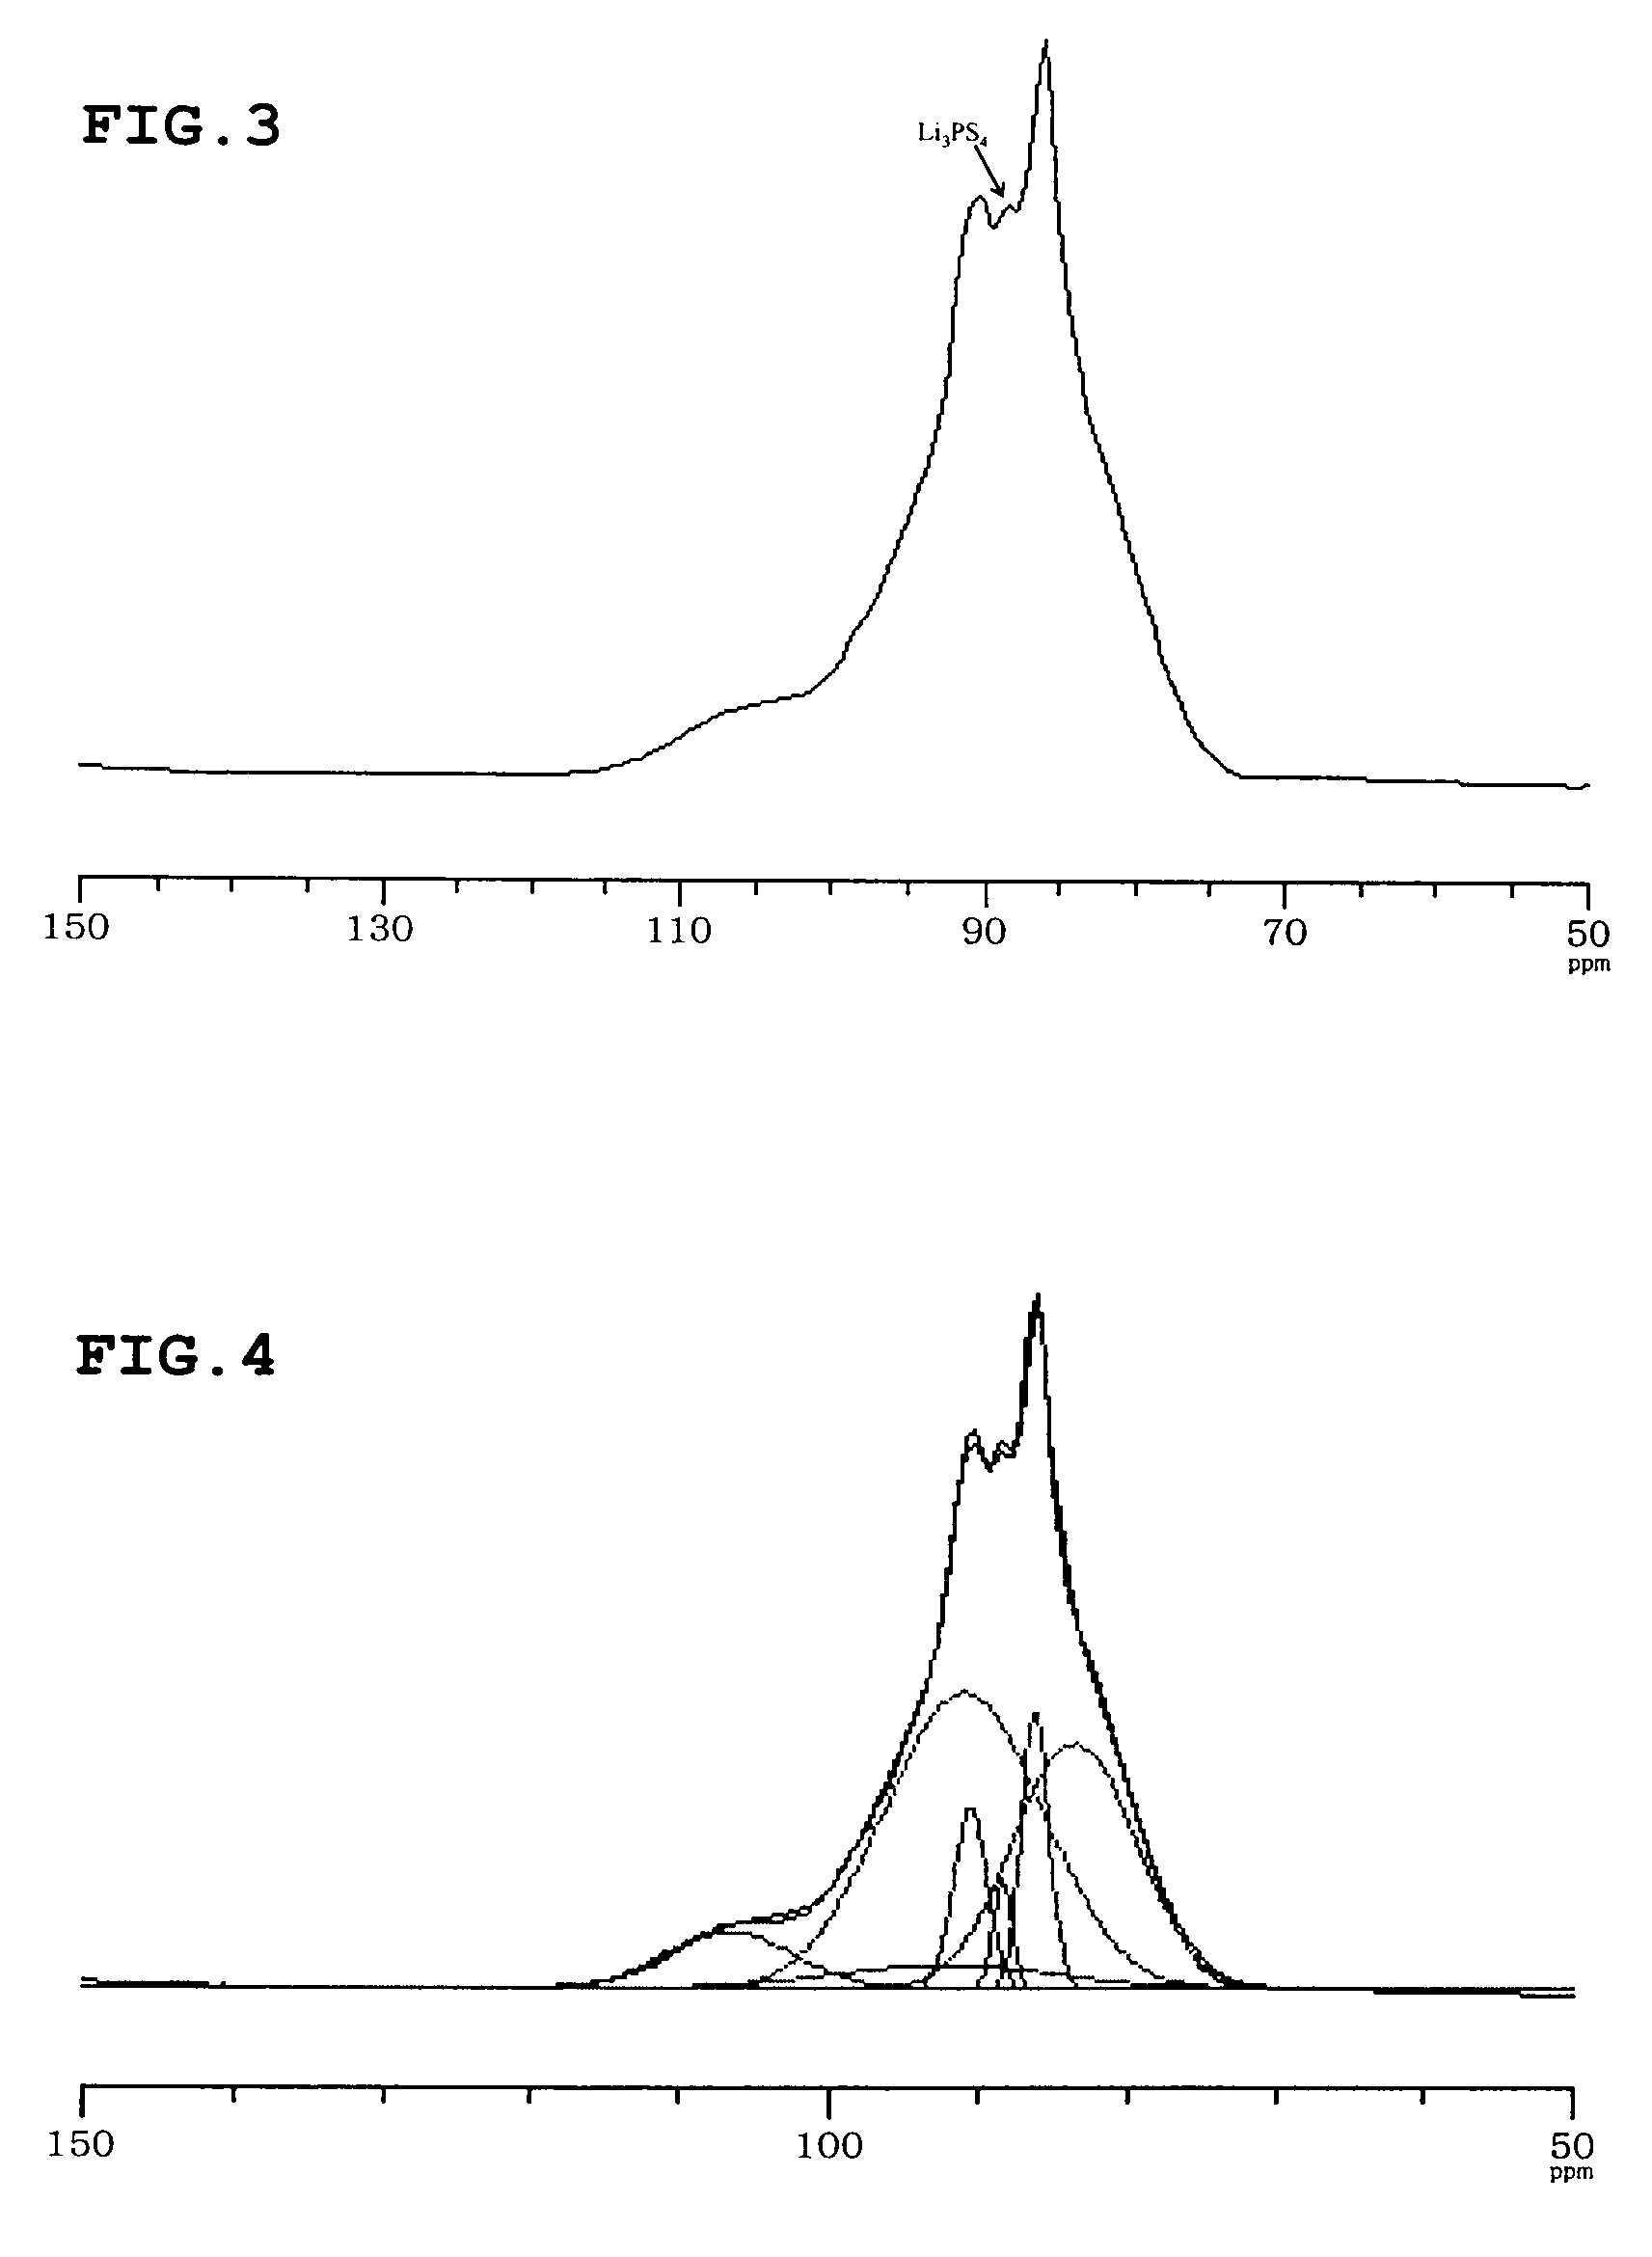 Lithium ion conductive sulfide-based solid electrolyte and all-solid lithium battery using same